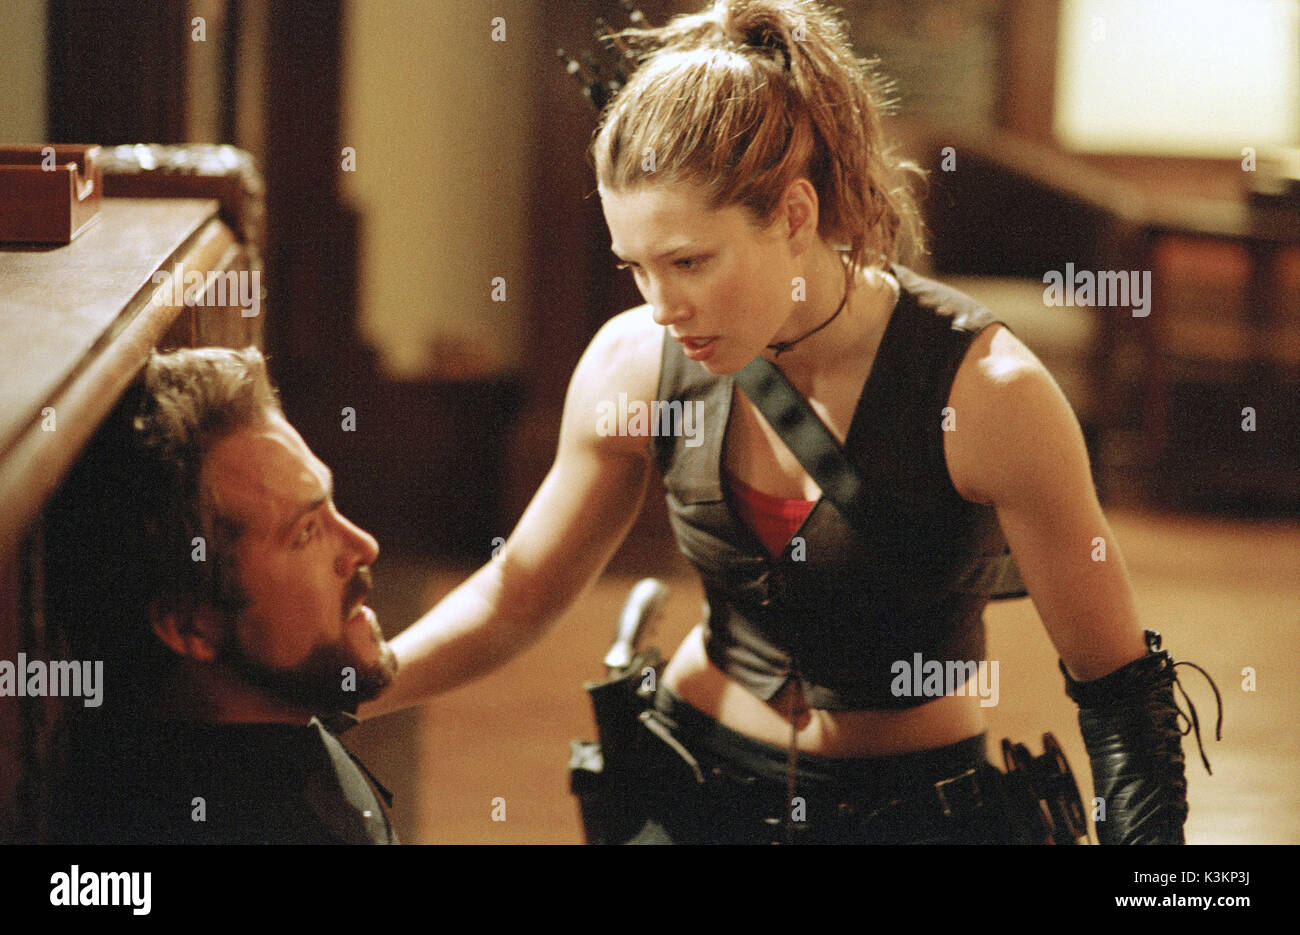 Jessica Biel Blade Trinity Blade High Resolution Stock Photography And Images Alamy They wanted a shot of her shooting straight into the camera and told her to just aim for the camera. https www alamy com blade trinity ryan reynolds jessica biel date 2004 image157171718 html